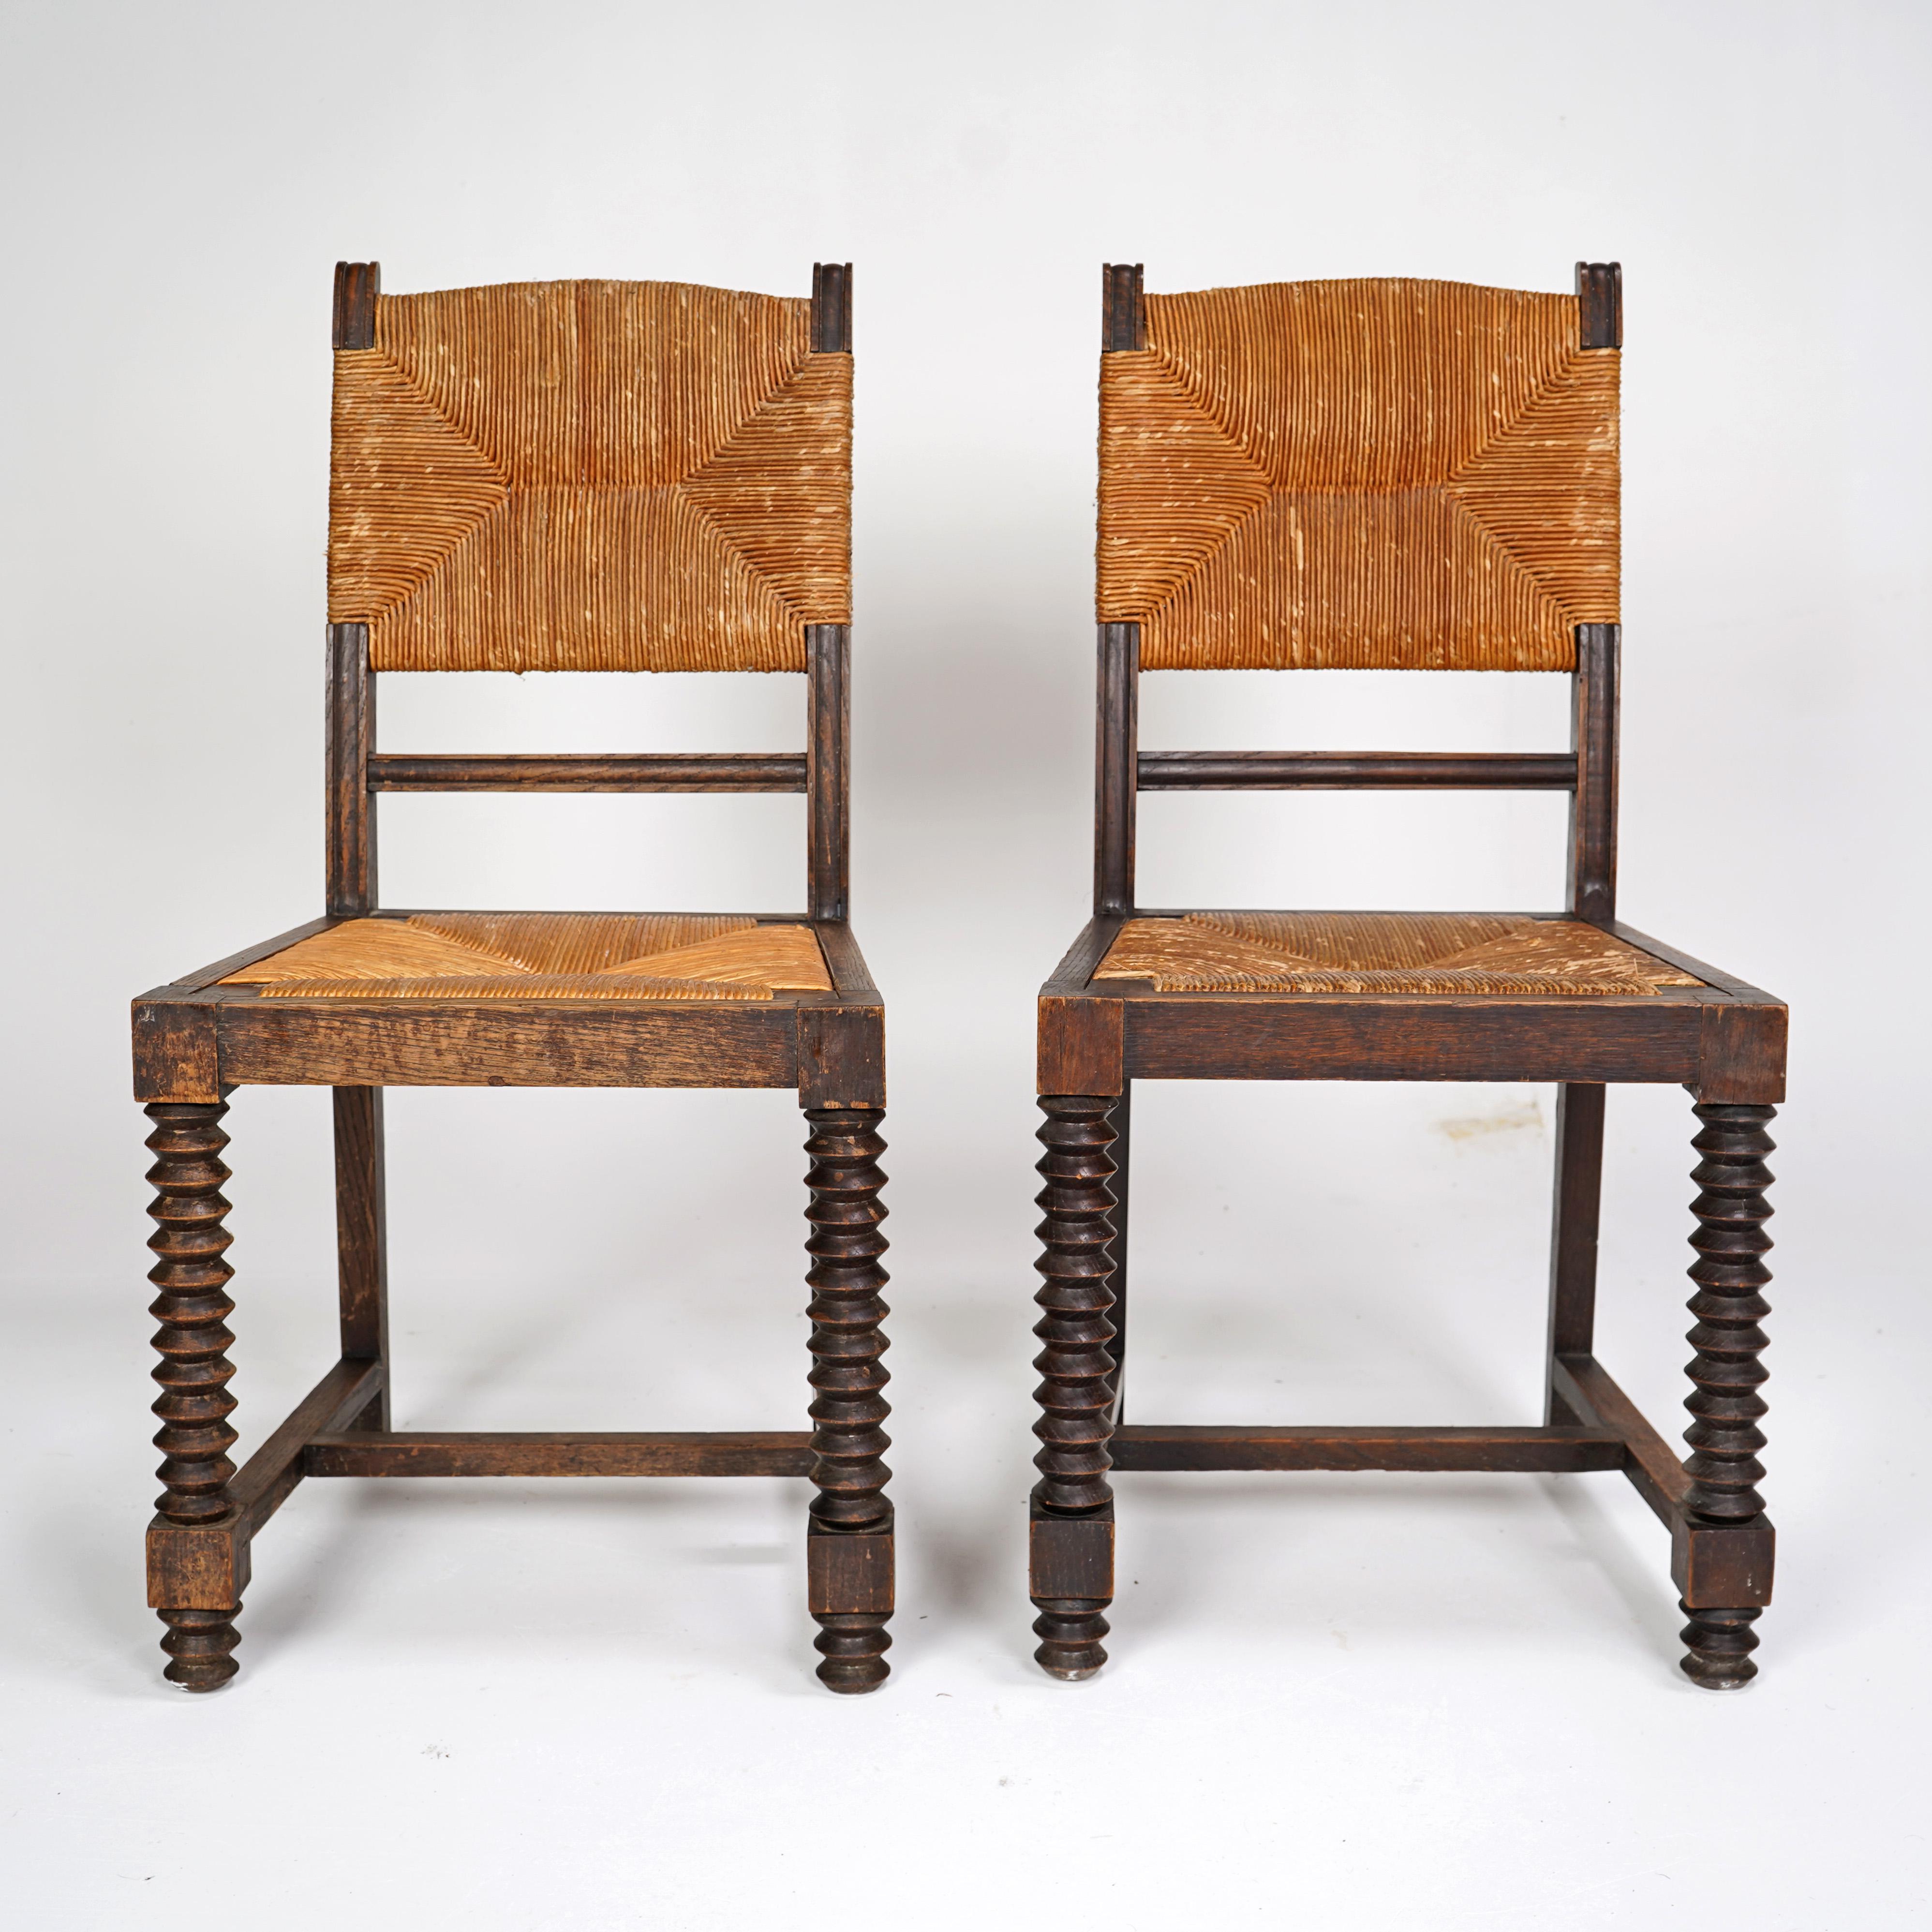  Pair of Charles Dudouyt style chairs with rush seat and back. French circa 1940s.

Dimensions
 
Height - 90cm
Width - 45cm
Depth - 42cm

About Us  
We are Stowaway London a small online business which sells a selection of Vintage & Antique